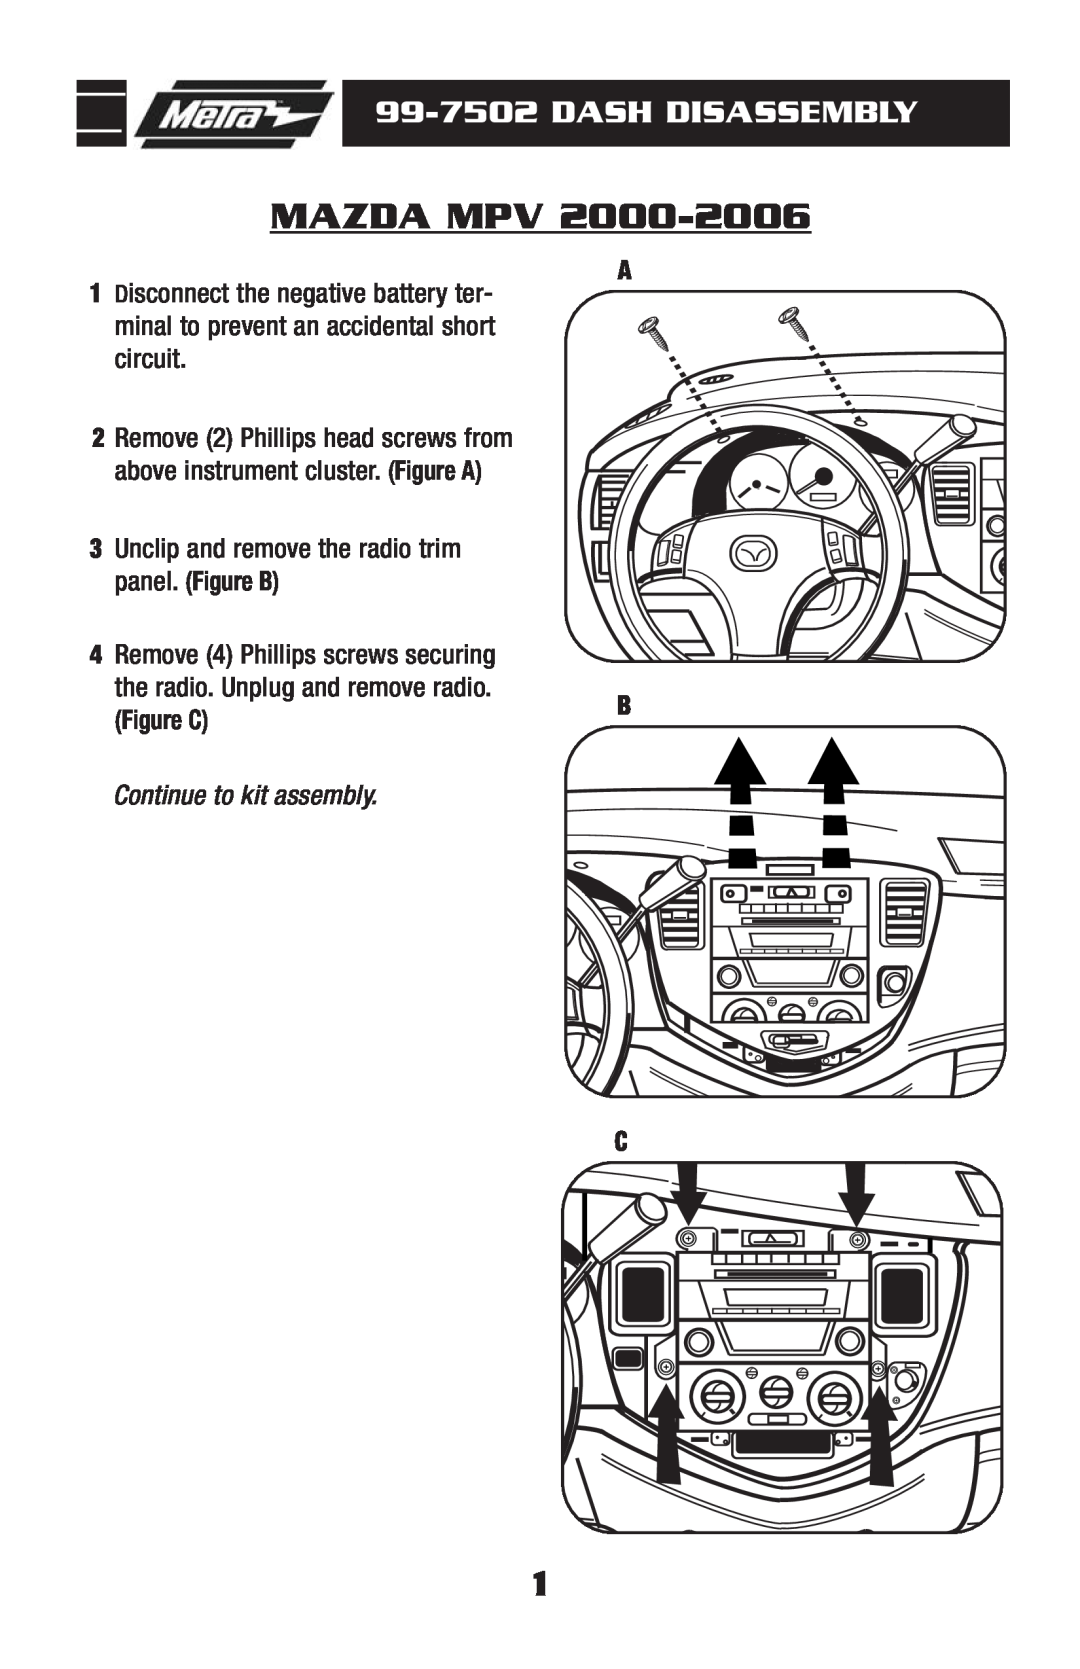 Metra Electronics installation instructions Mazda Mpv, 99-7502DASH DISASSEMBLY, Figure C, Continue to kit assembly 